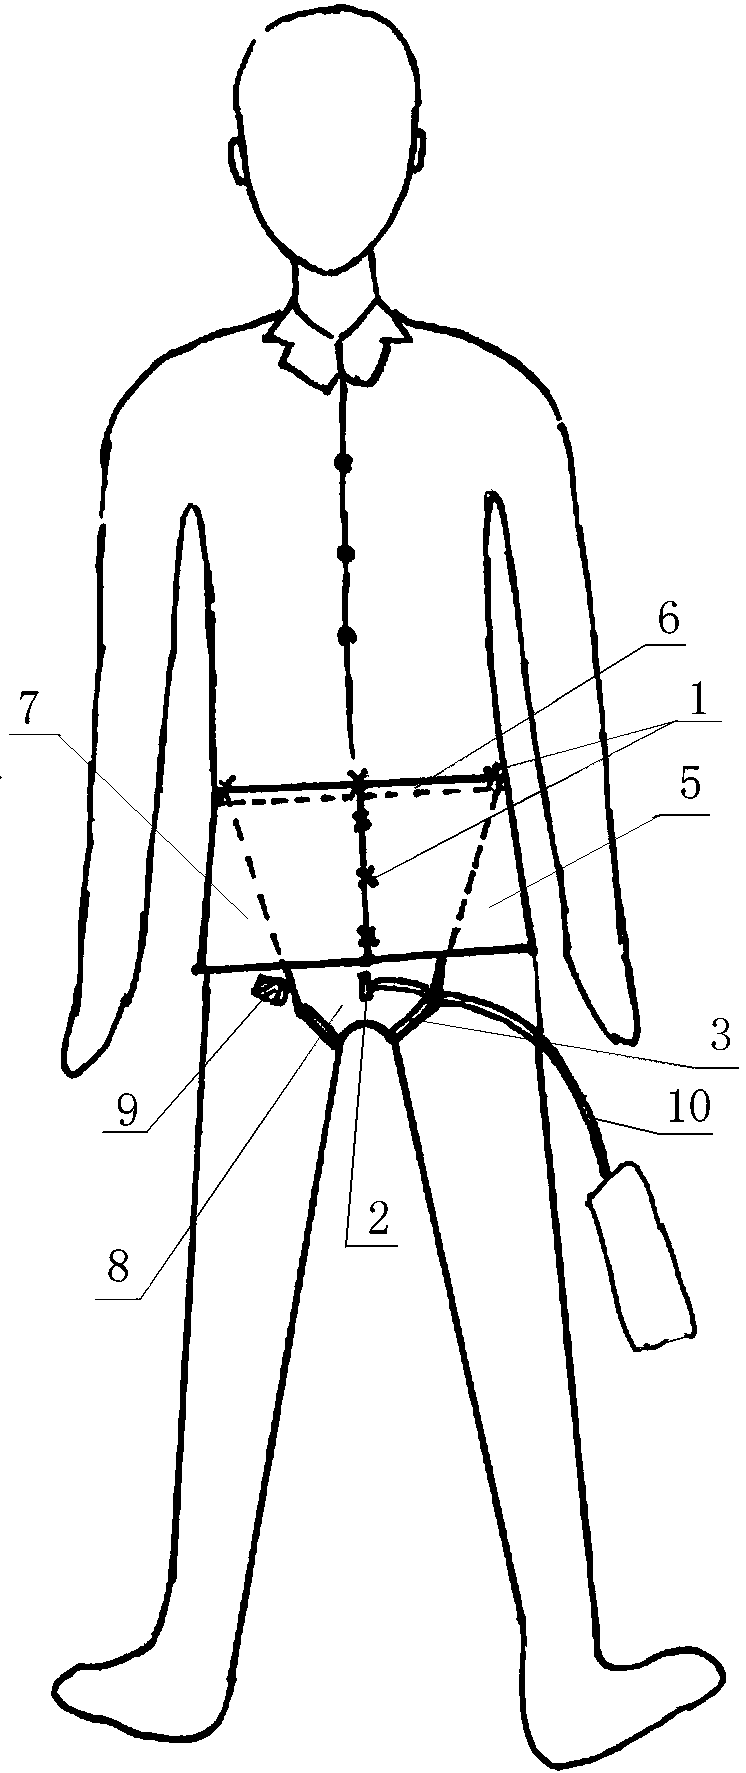 Practical pants for intra-aortic balloon counterpulsation